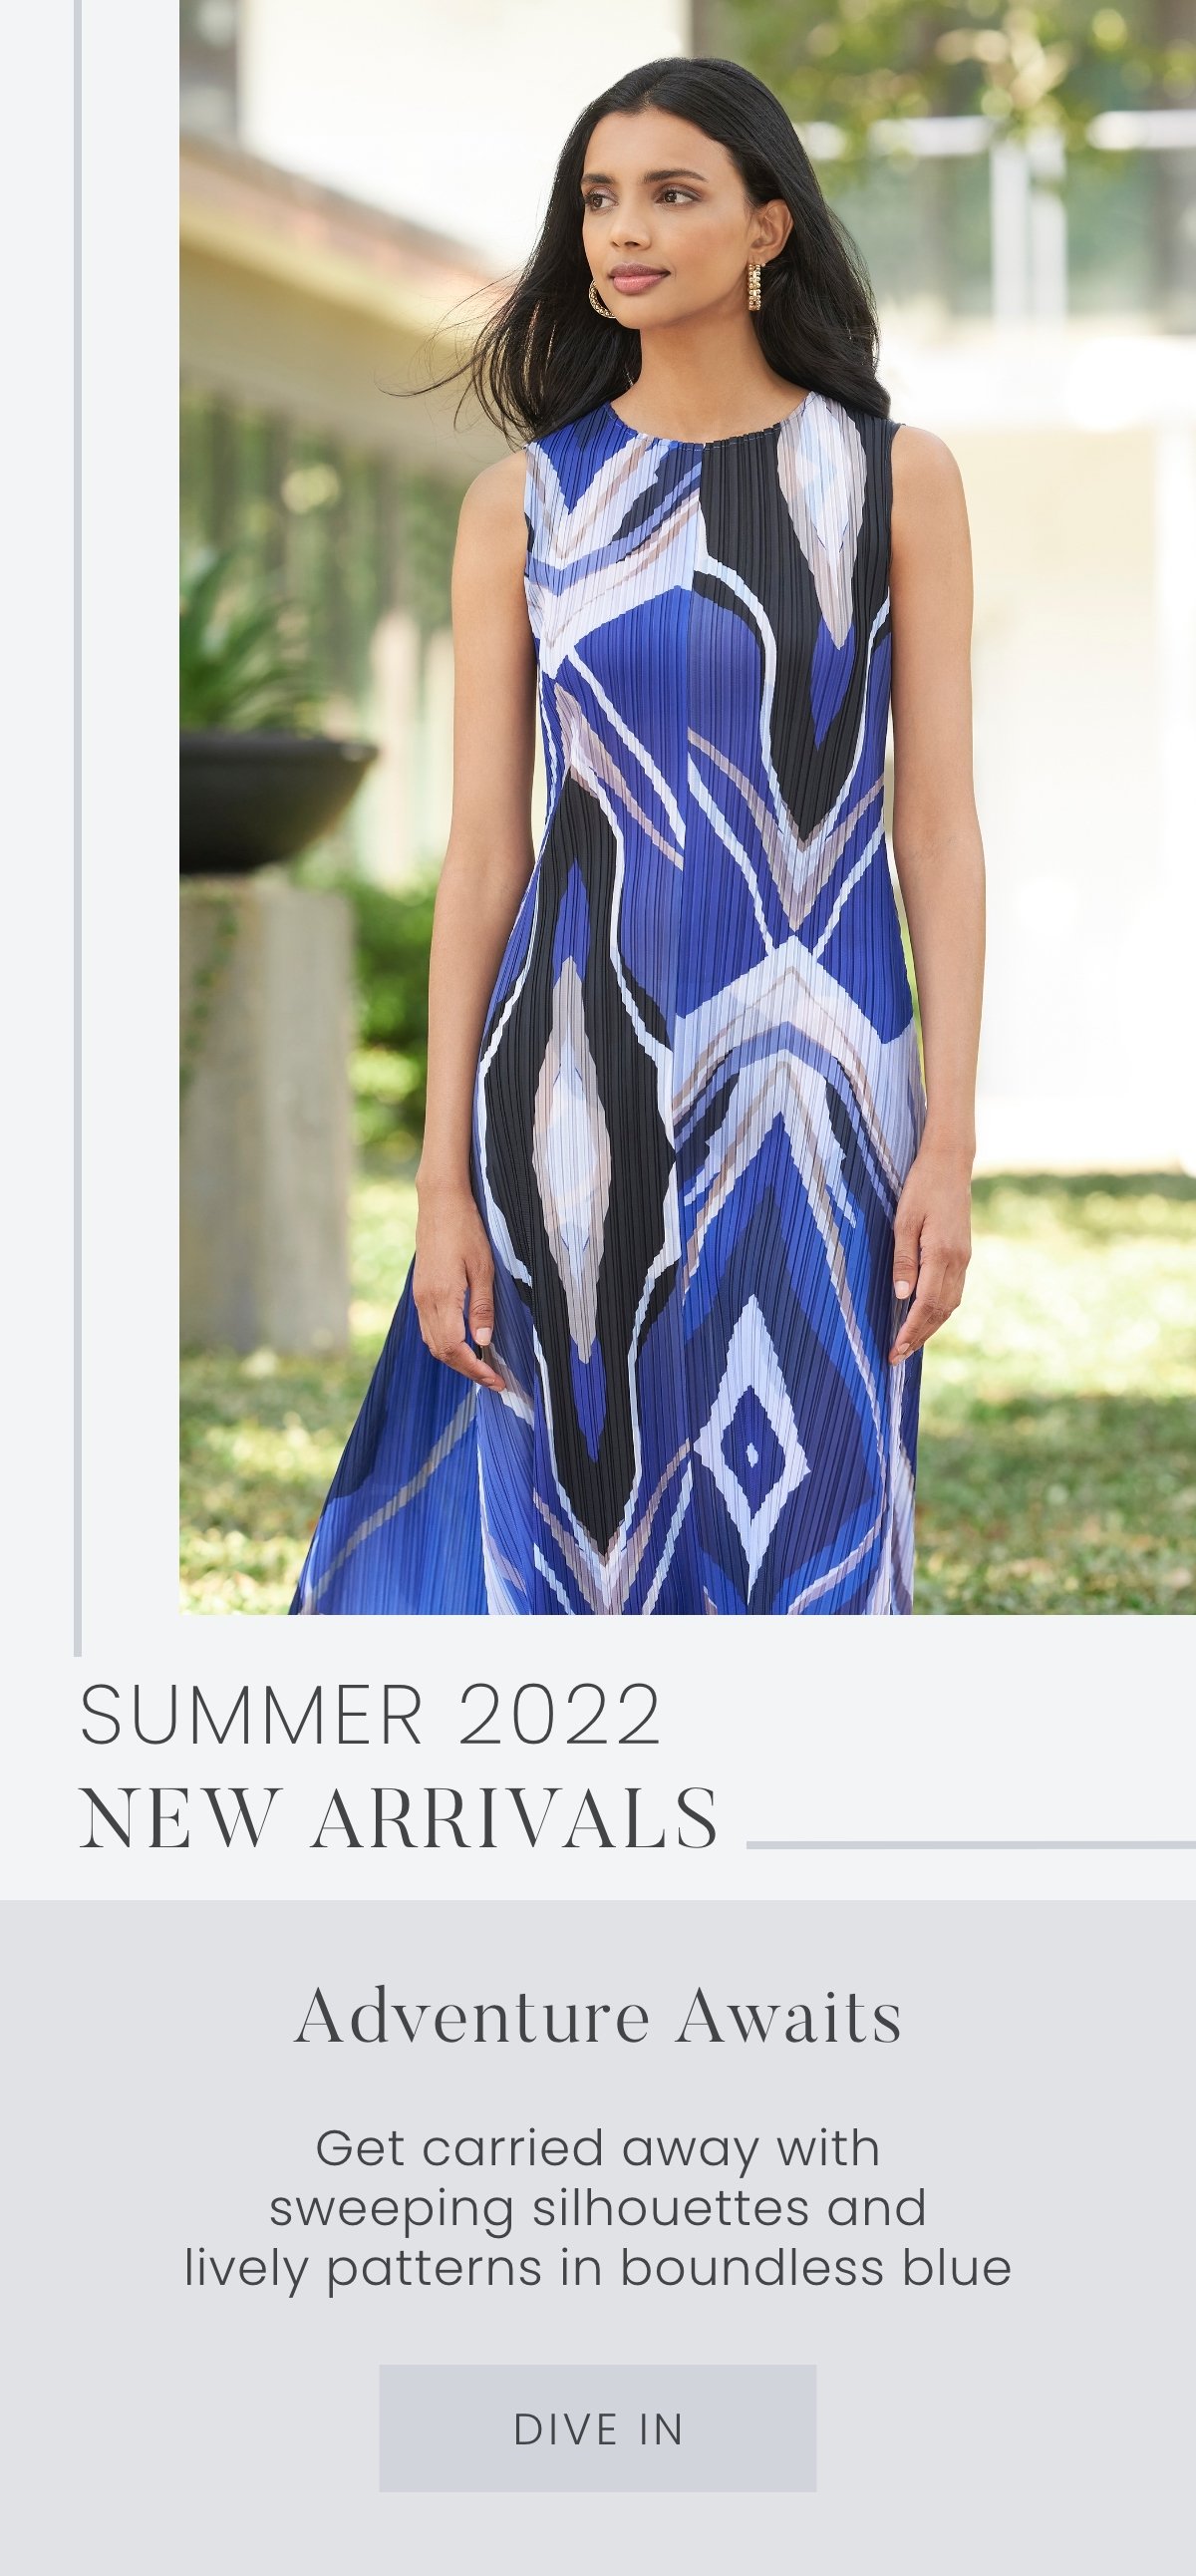 Summer 2022 Collection: Adventure Awaits - Get swept away with new arrivals cast in a boundless blue, sweeping silhouettes, and our liveliest patterns yet. Dive In >>